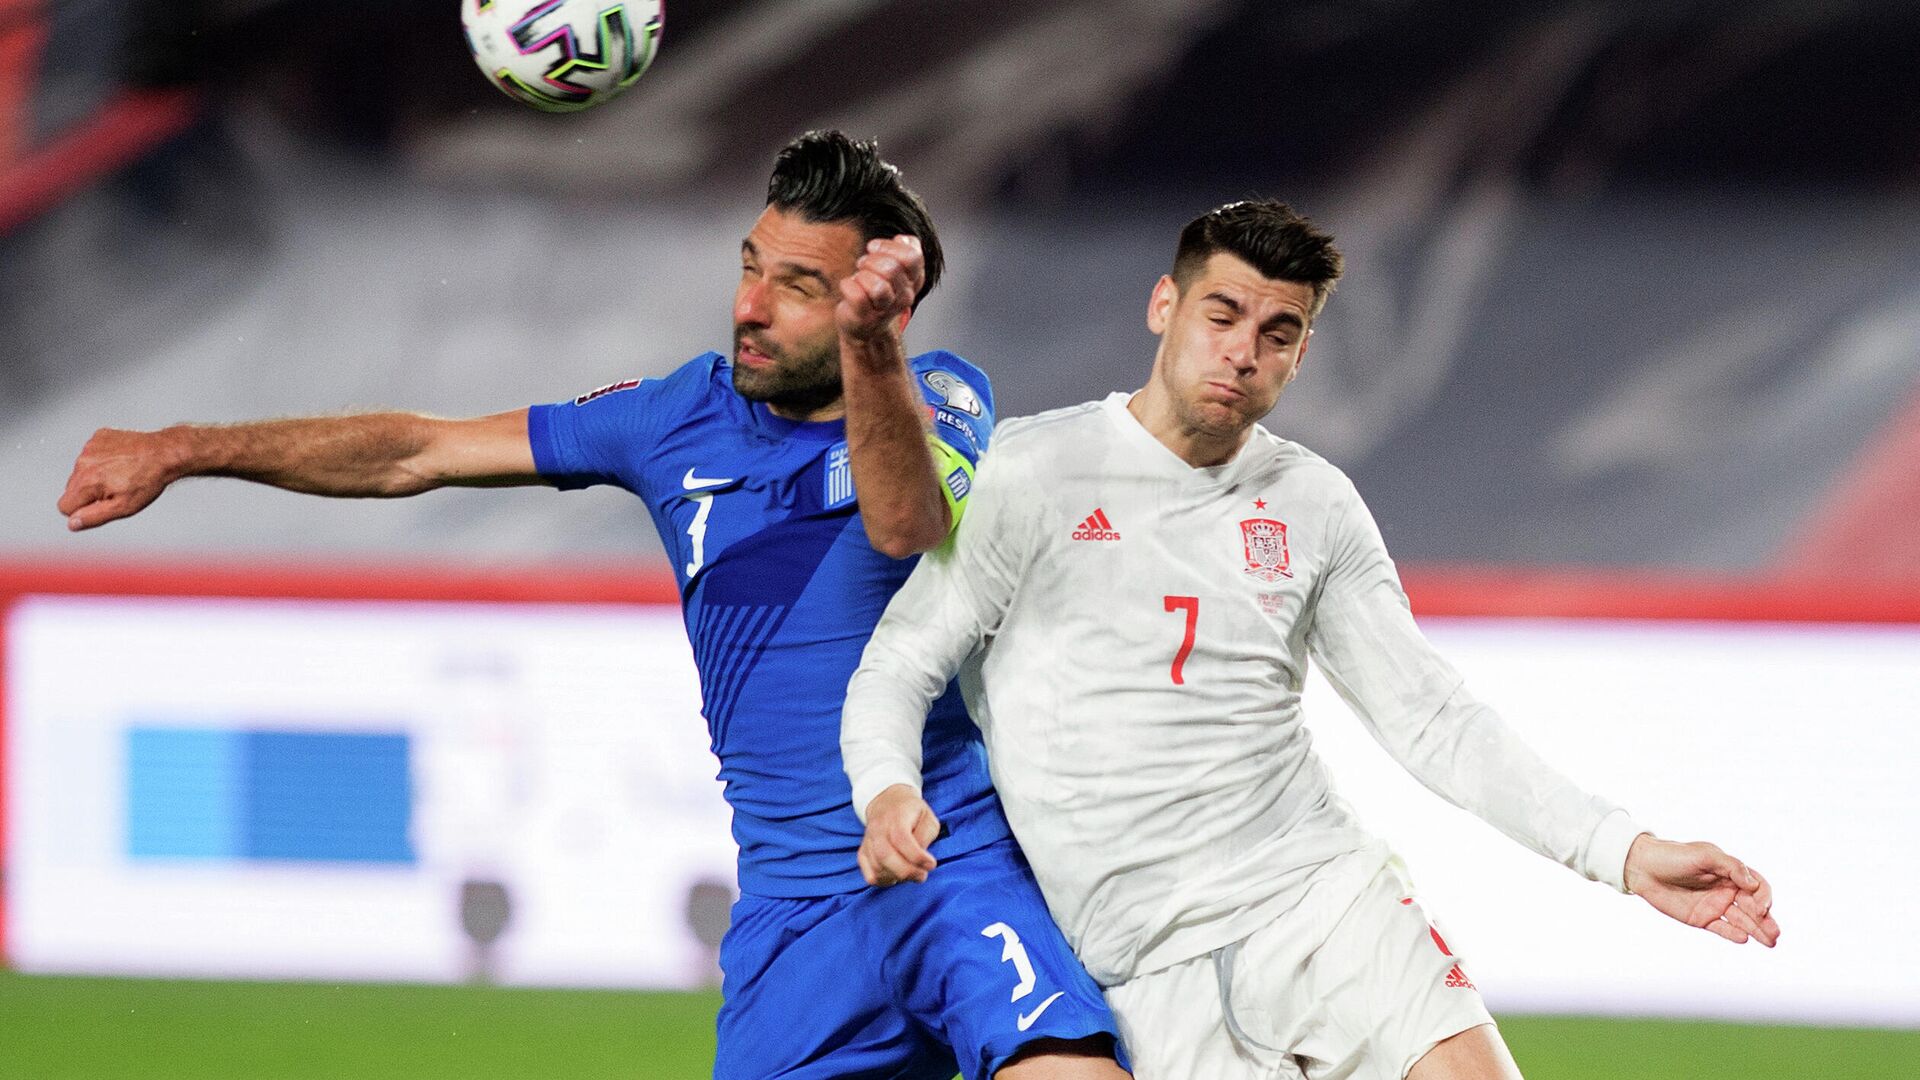 Spain's forward Alvaro Morata (R) challenges Greece's defender Georgios Tzavelas during the FIFA World Cup Qatar 2022 qualification football match between Spain and Greece on March 25, 2021 at Los Carmenes stadium in Granada. (Photo by JORGE GUERRERO / AFP) - РИА Новости, 1920, 26.03.2021